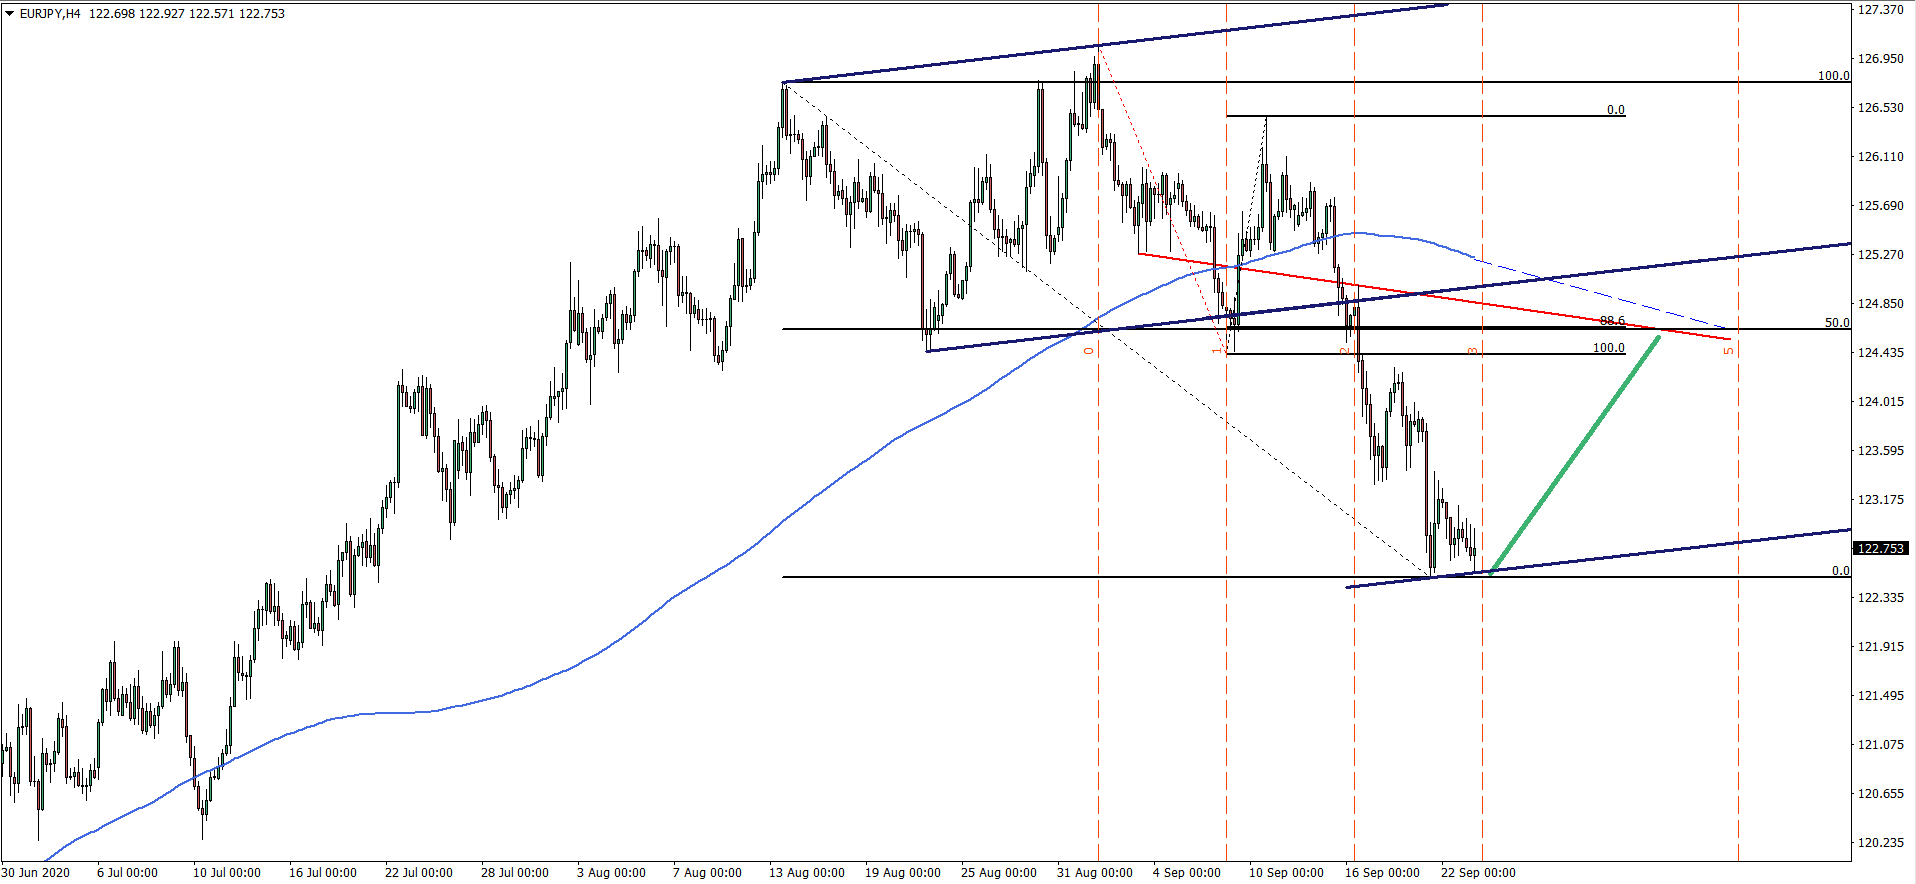 EURJPY 4hour chart Sep 23th 2020